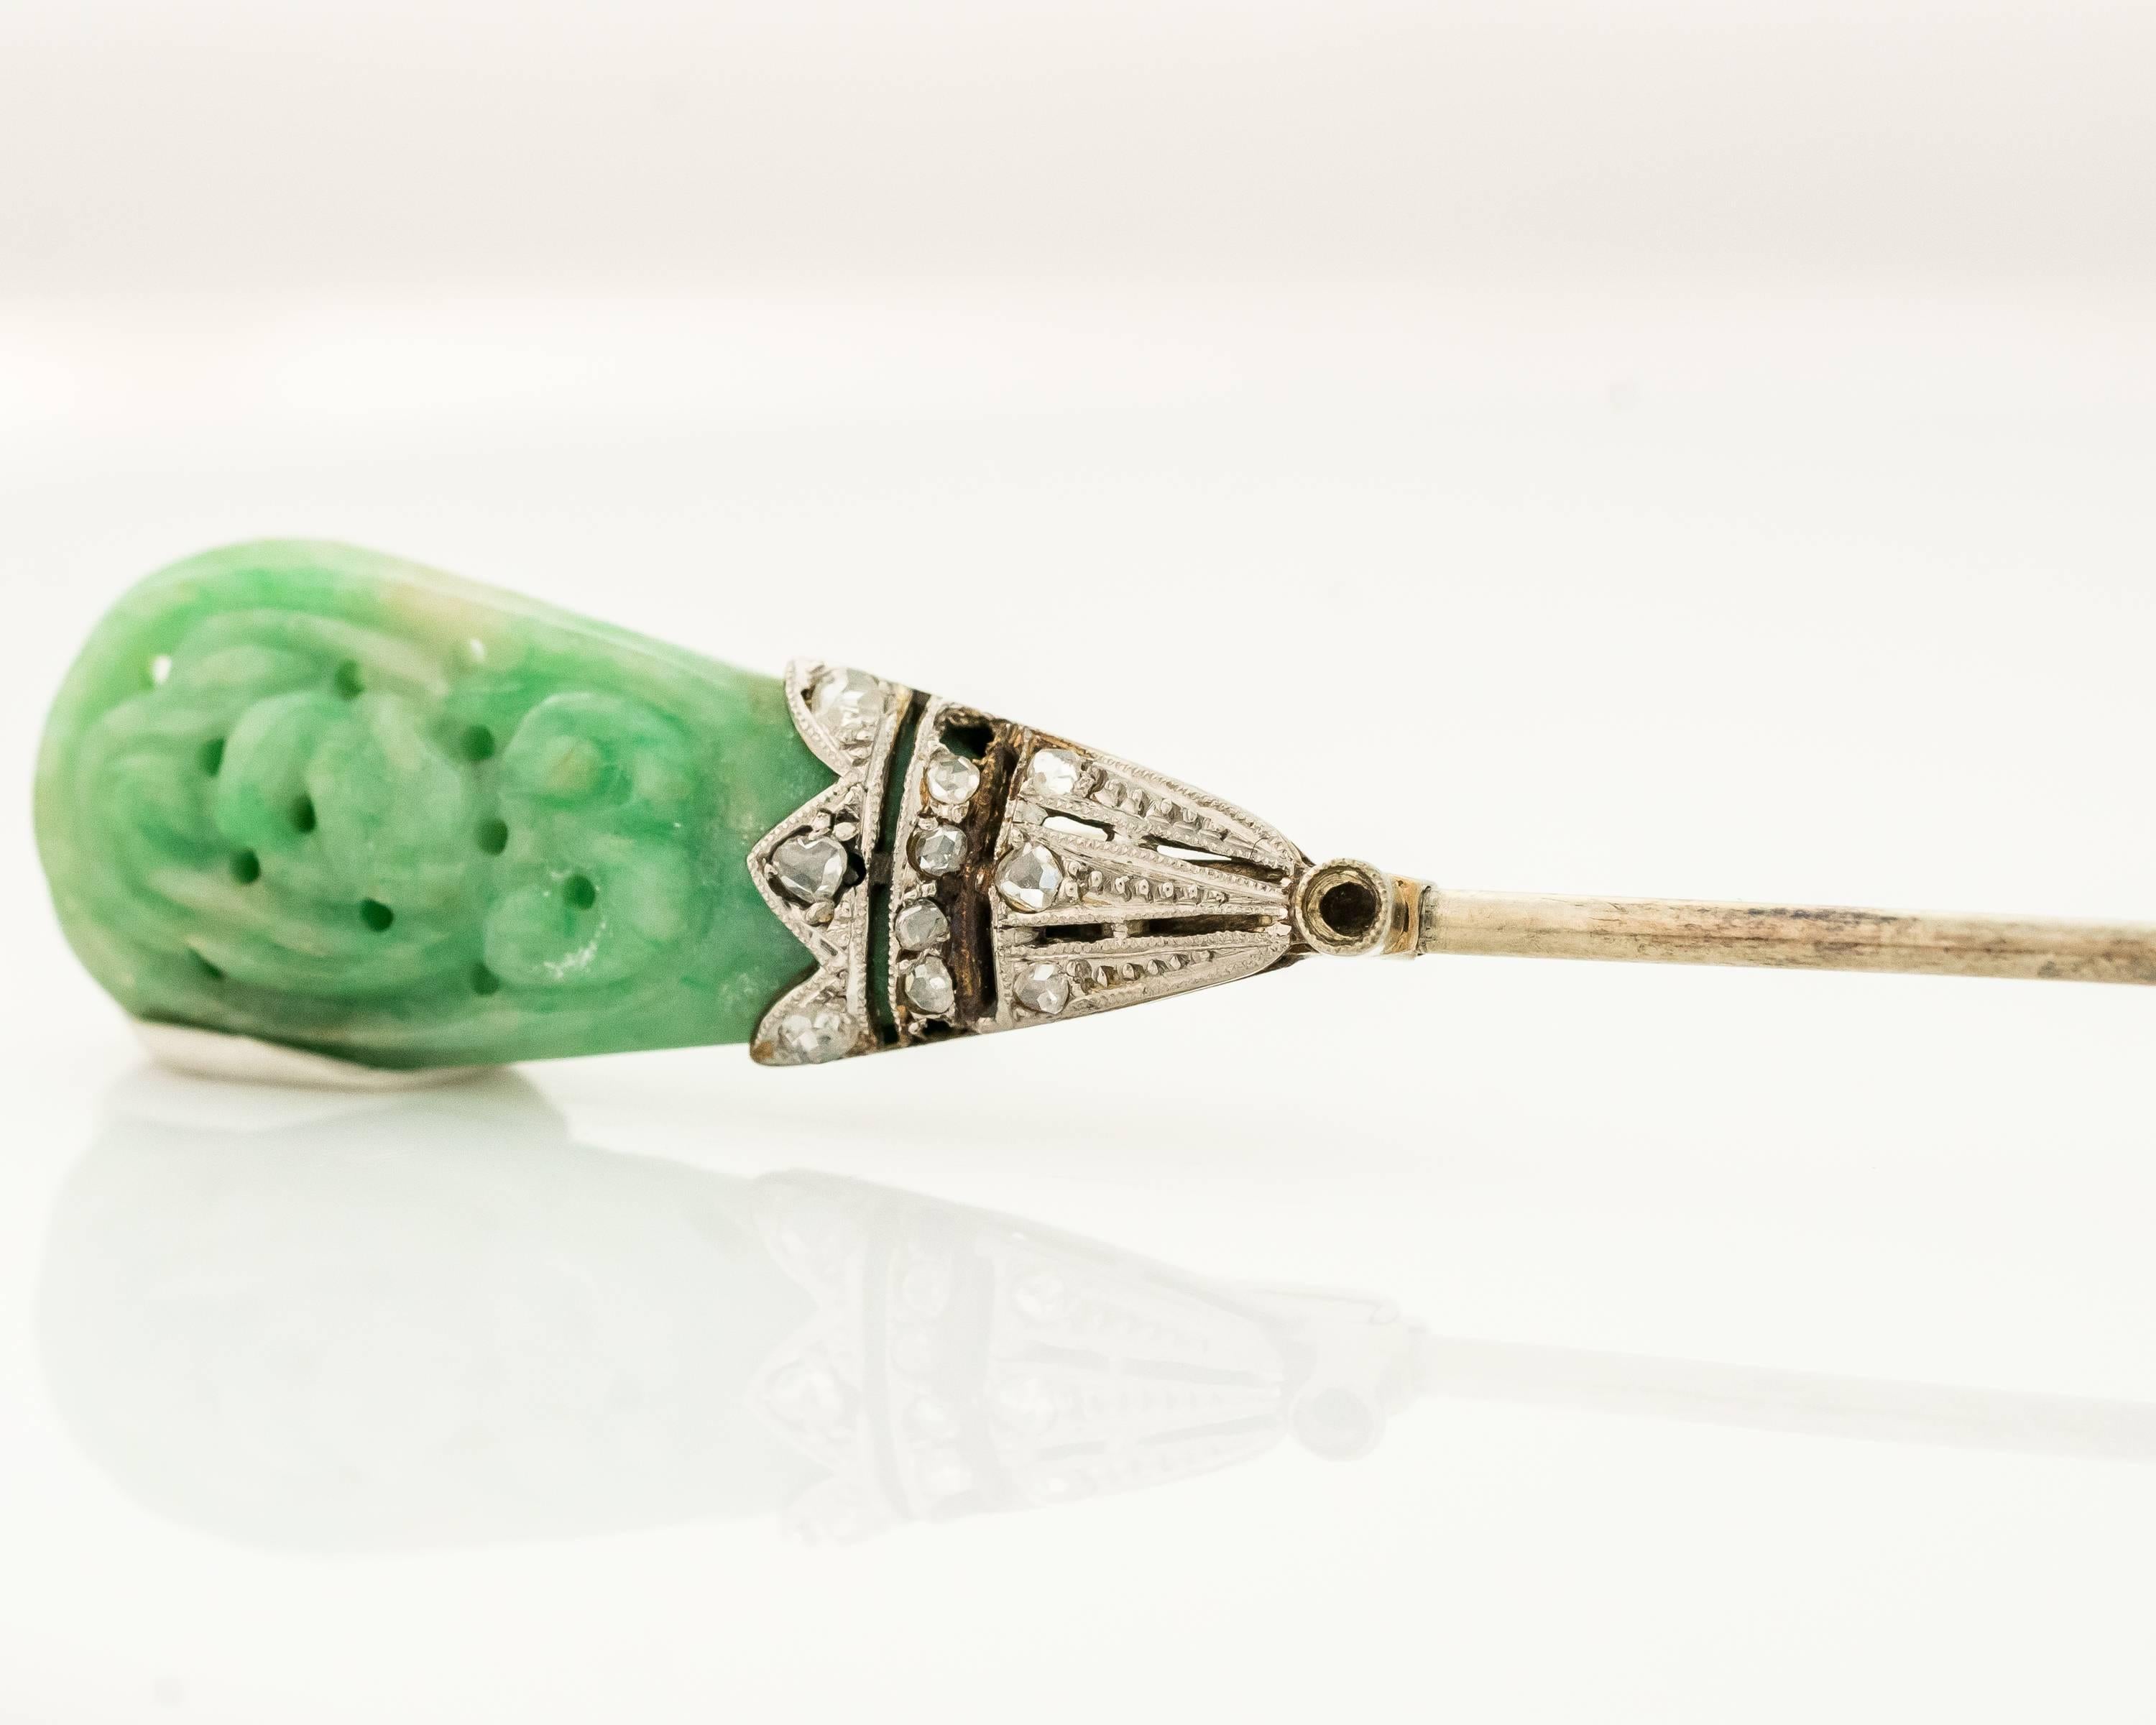 This 1890s floral motif Jade and Diamond Jabot Pin will add an elegant touch to any ensemble. Each end of the 14 karat white gold pin features a delicately carved Jade flower nestled in a 14 karat white gold with Rose Cut Diamonds end cap. This